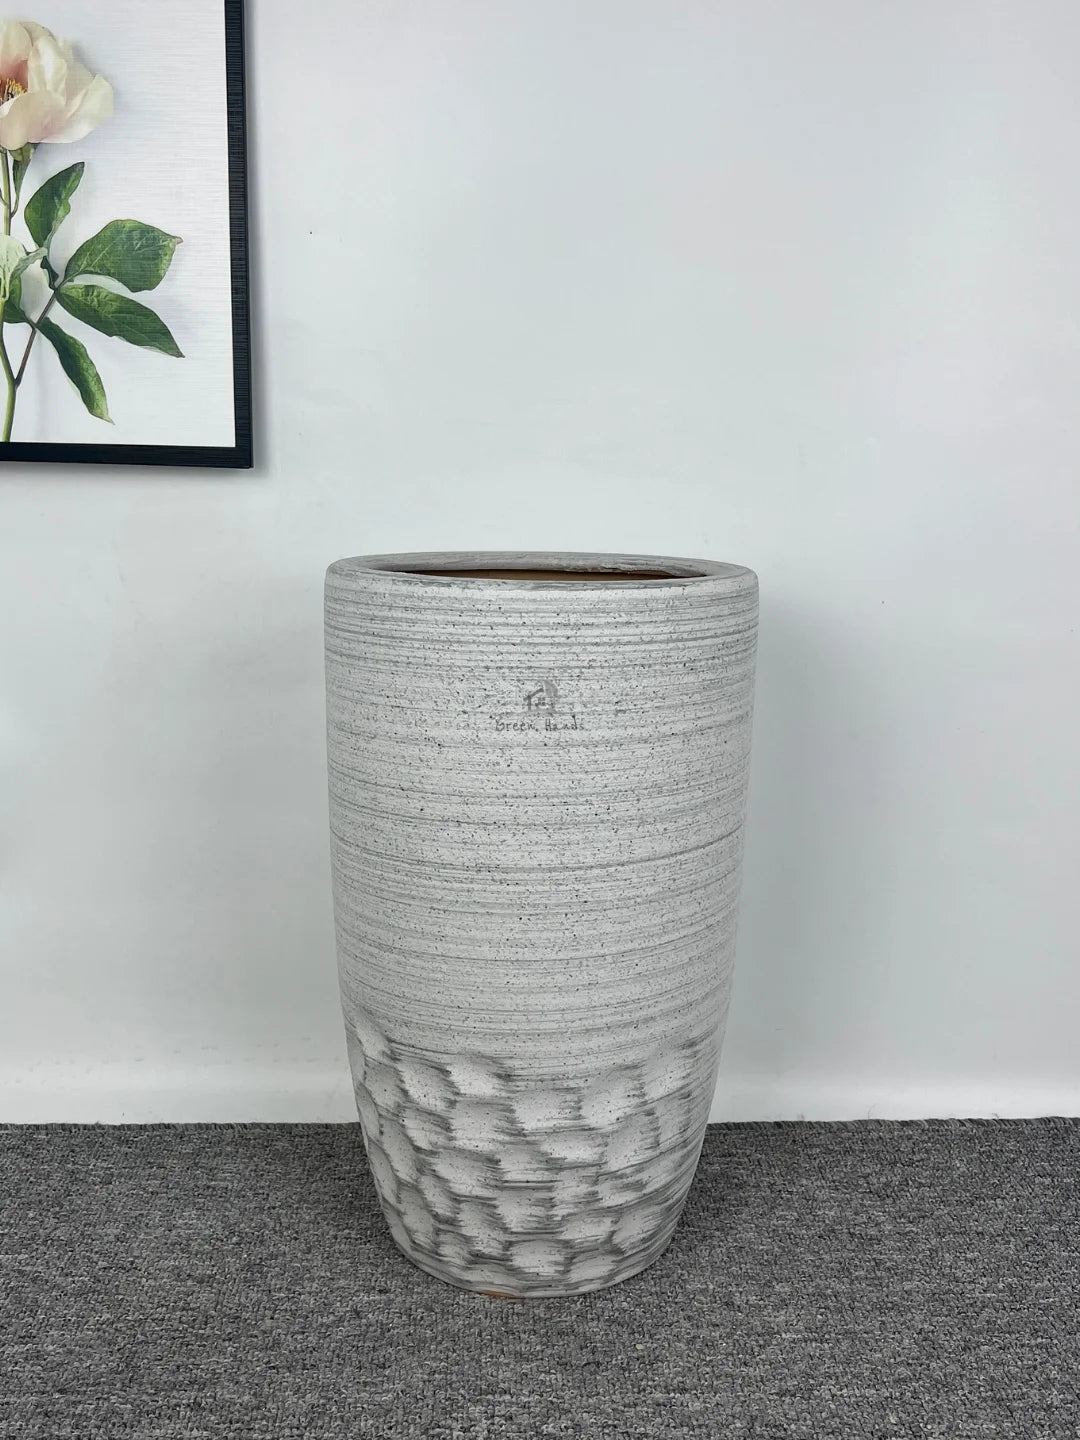 Modern Tall Ceramic Grey Honey Comb Pots: Elegance and Functionality Combined M